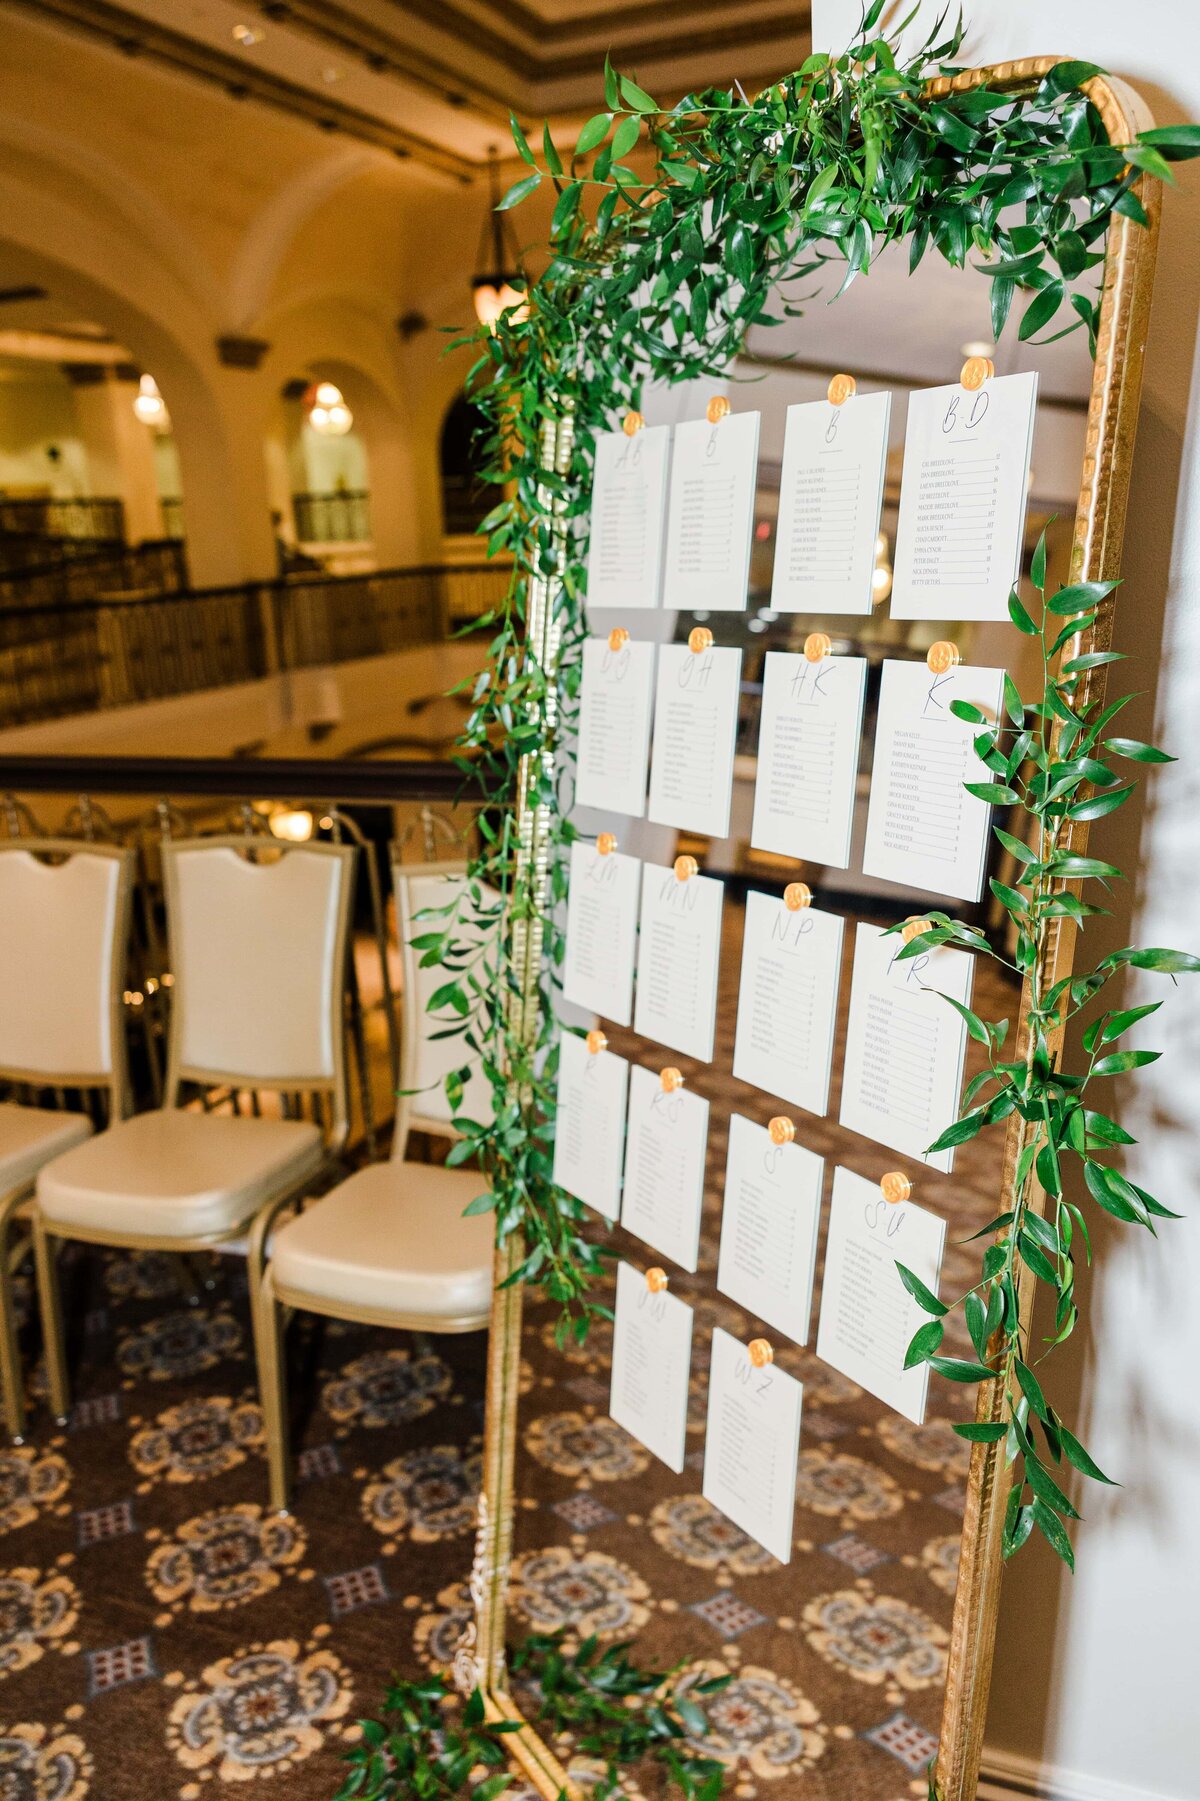 Seating arrangement display at a wedding in Iowa, featuring names listed on white cards hanging from a gold frame adorned with green vines, set in a room with elegant chairs and patterned carpet.